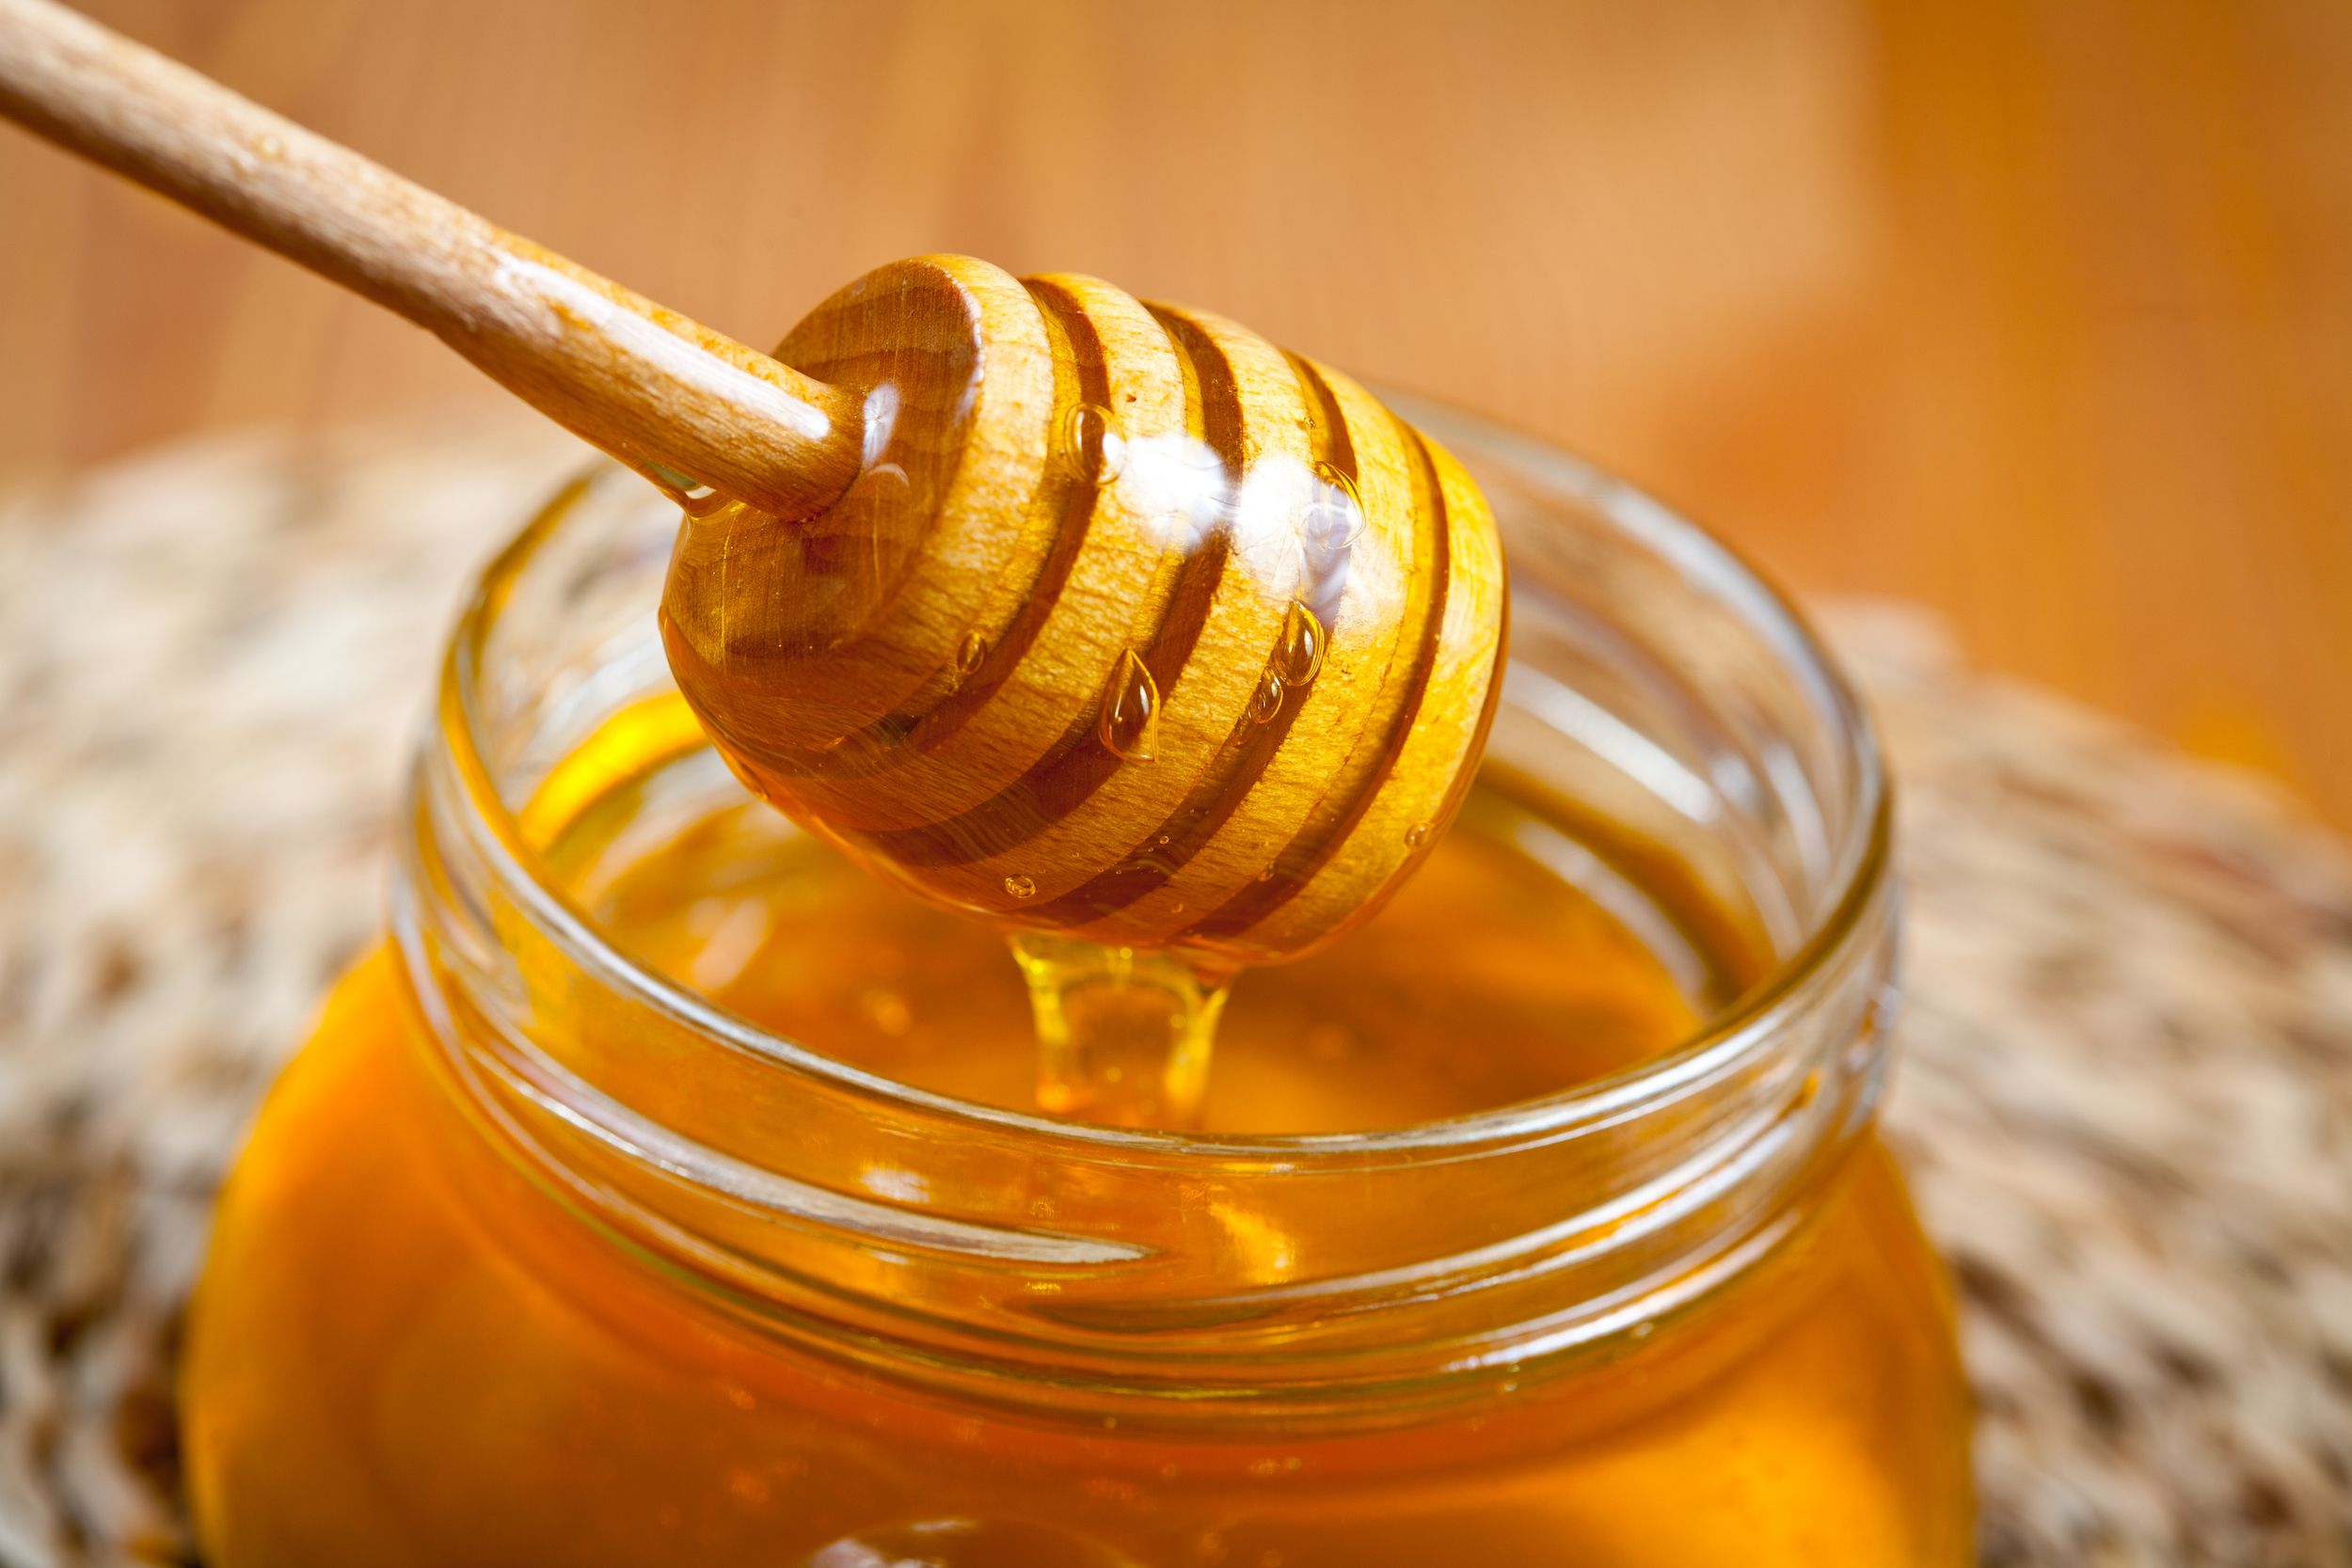 12 Amazing Beauty Uses For Honey To Benefit Skin, Hair, and Nails